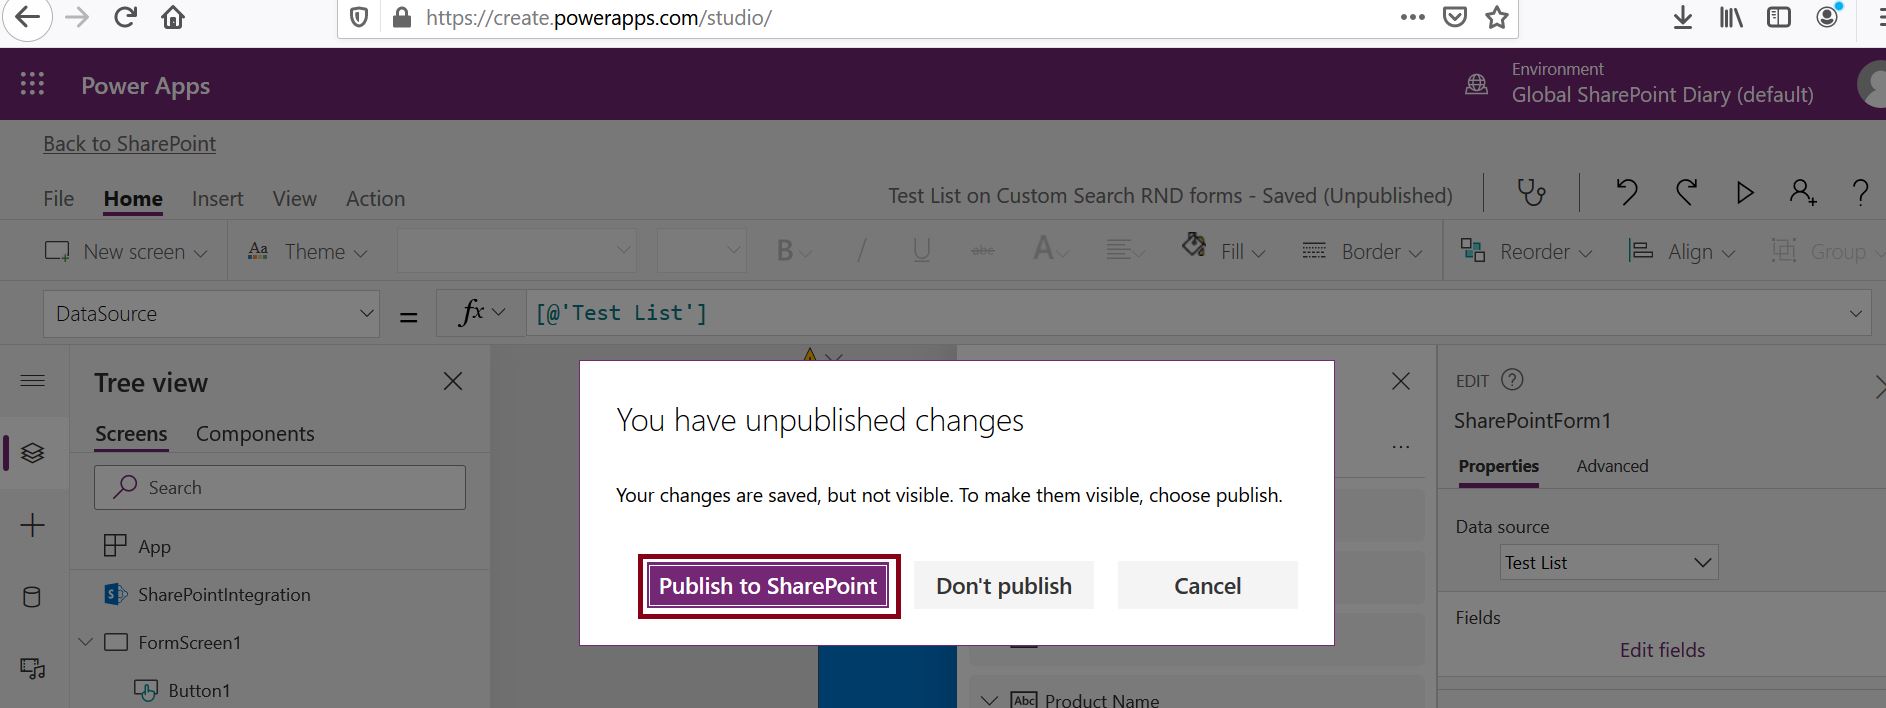 How to Publish PowerApps to SharePoint Online site - Publish to SharePoint